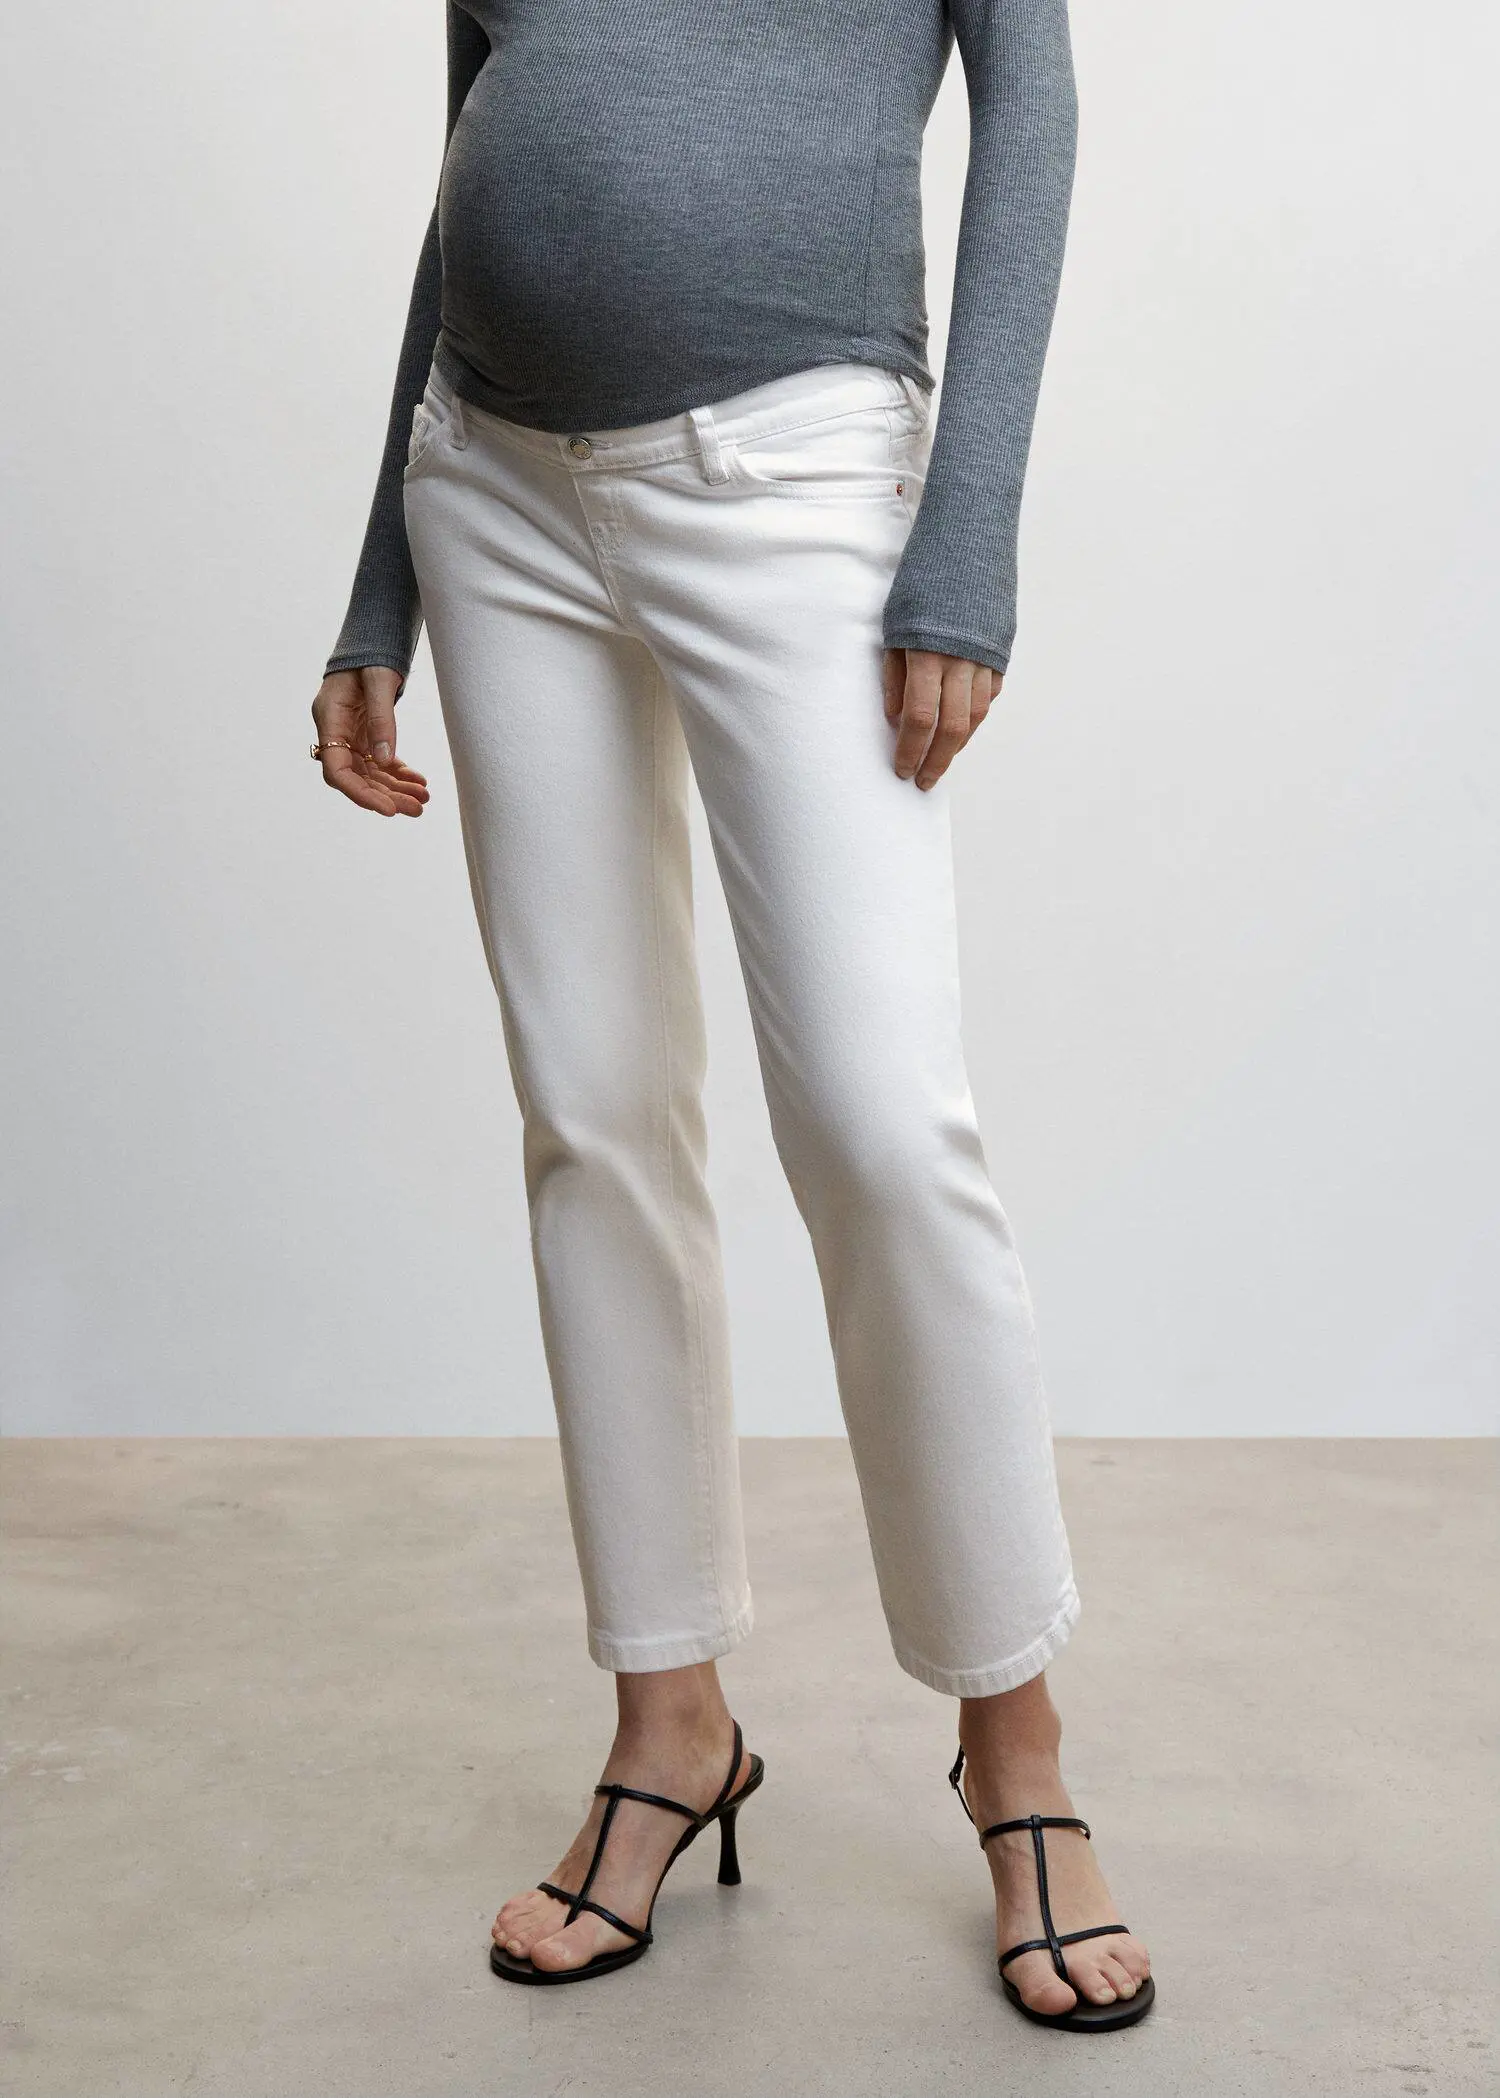 Mango Maternity Straight Jeans. a woman standing in a room wearing white pants. 